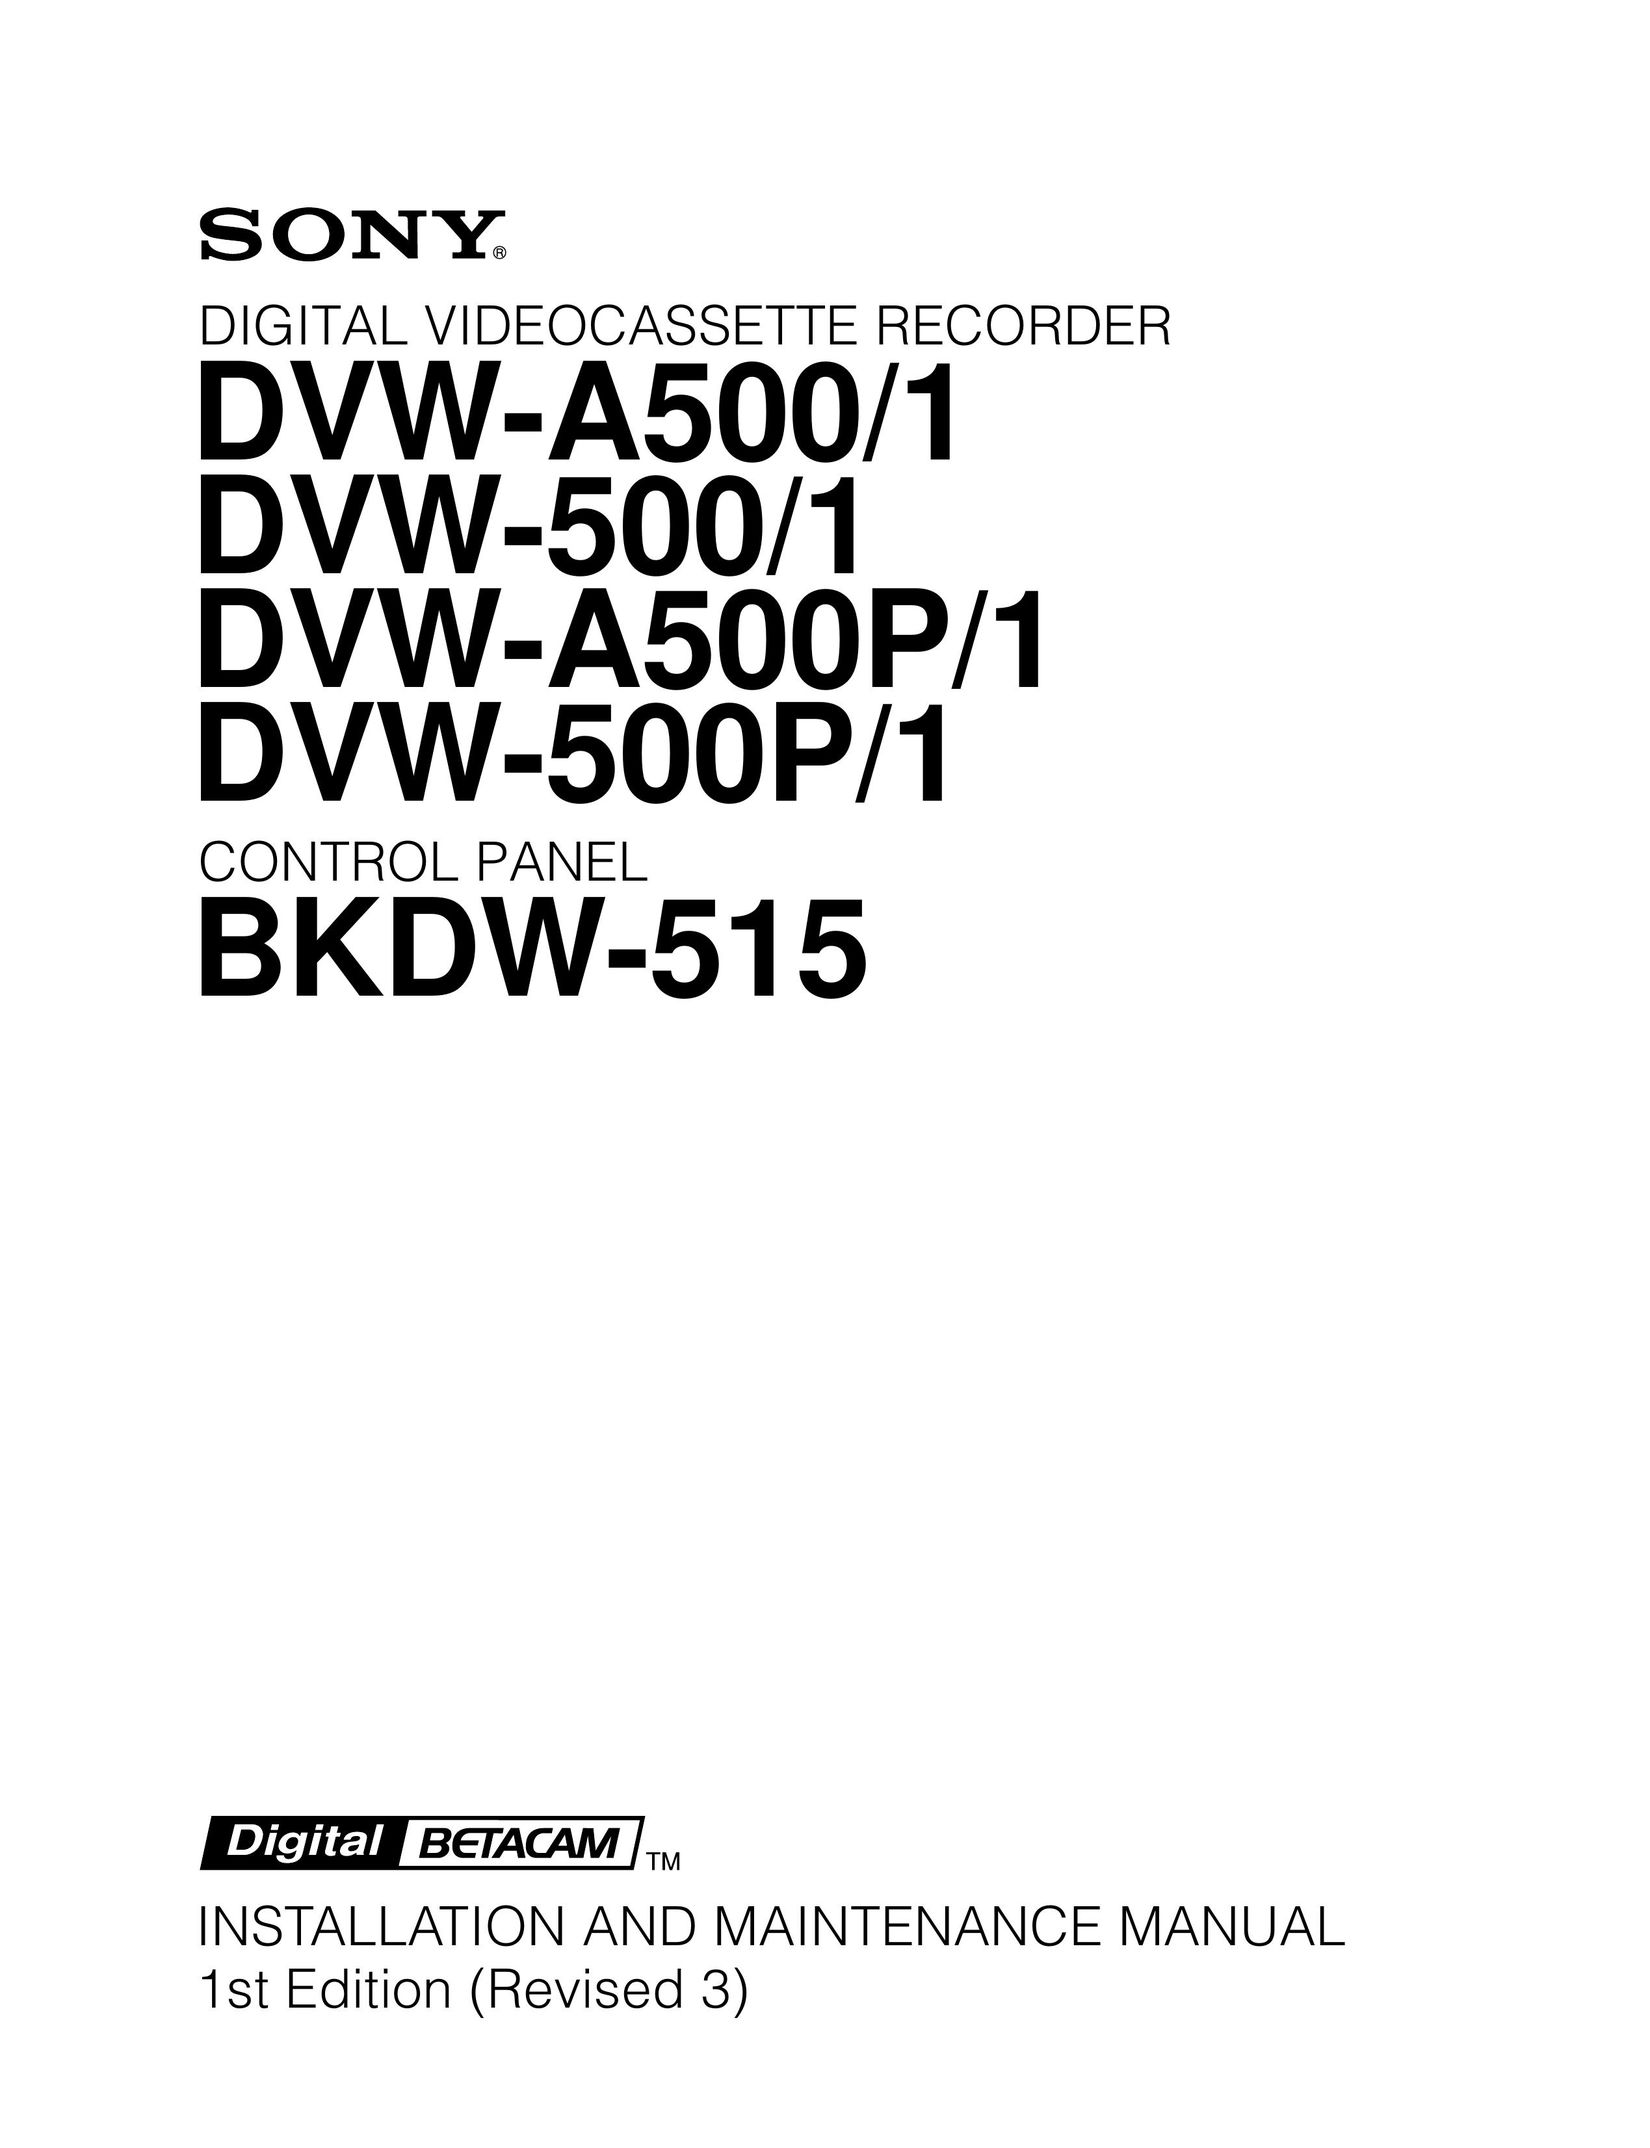 Sony DVW-A500/1 VCR User Manual